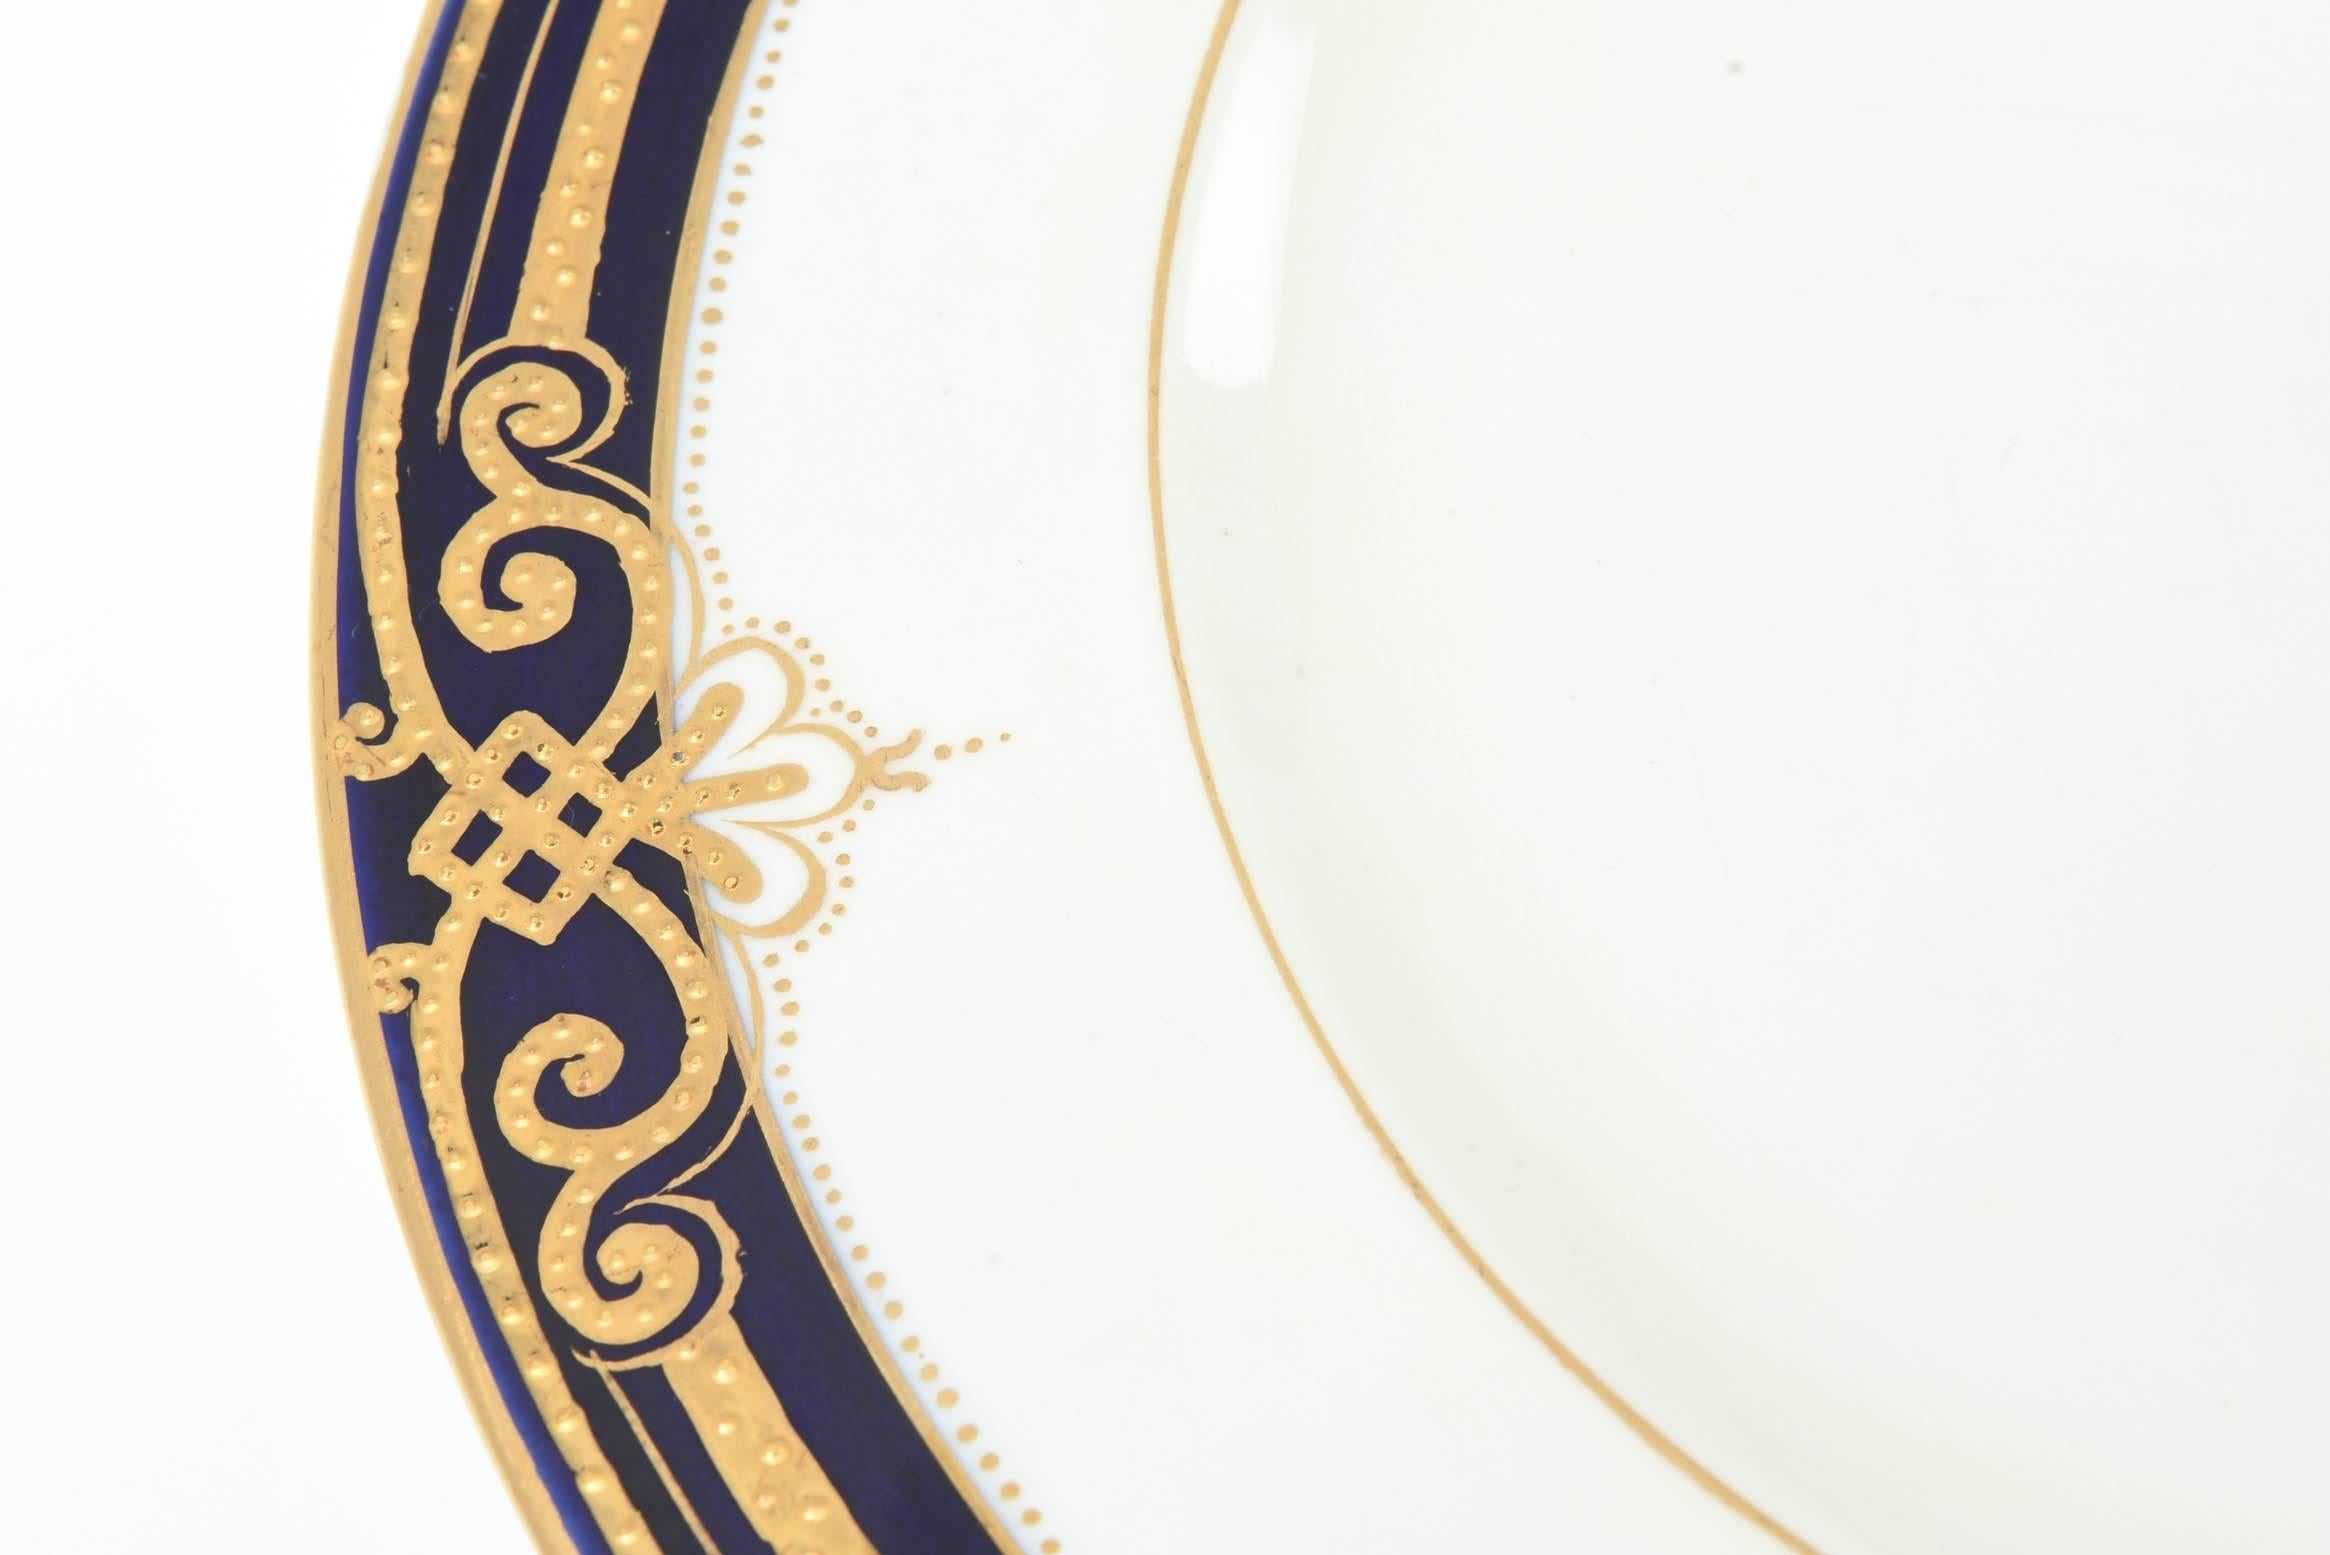 Early 20th Century 12 Elegant Cobalt Blue and Raised Tooled Gilt Dinner Plates, Antique English